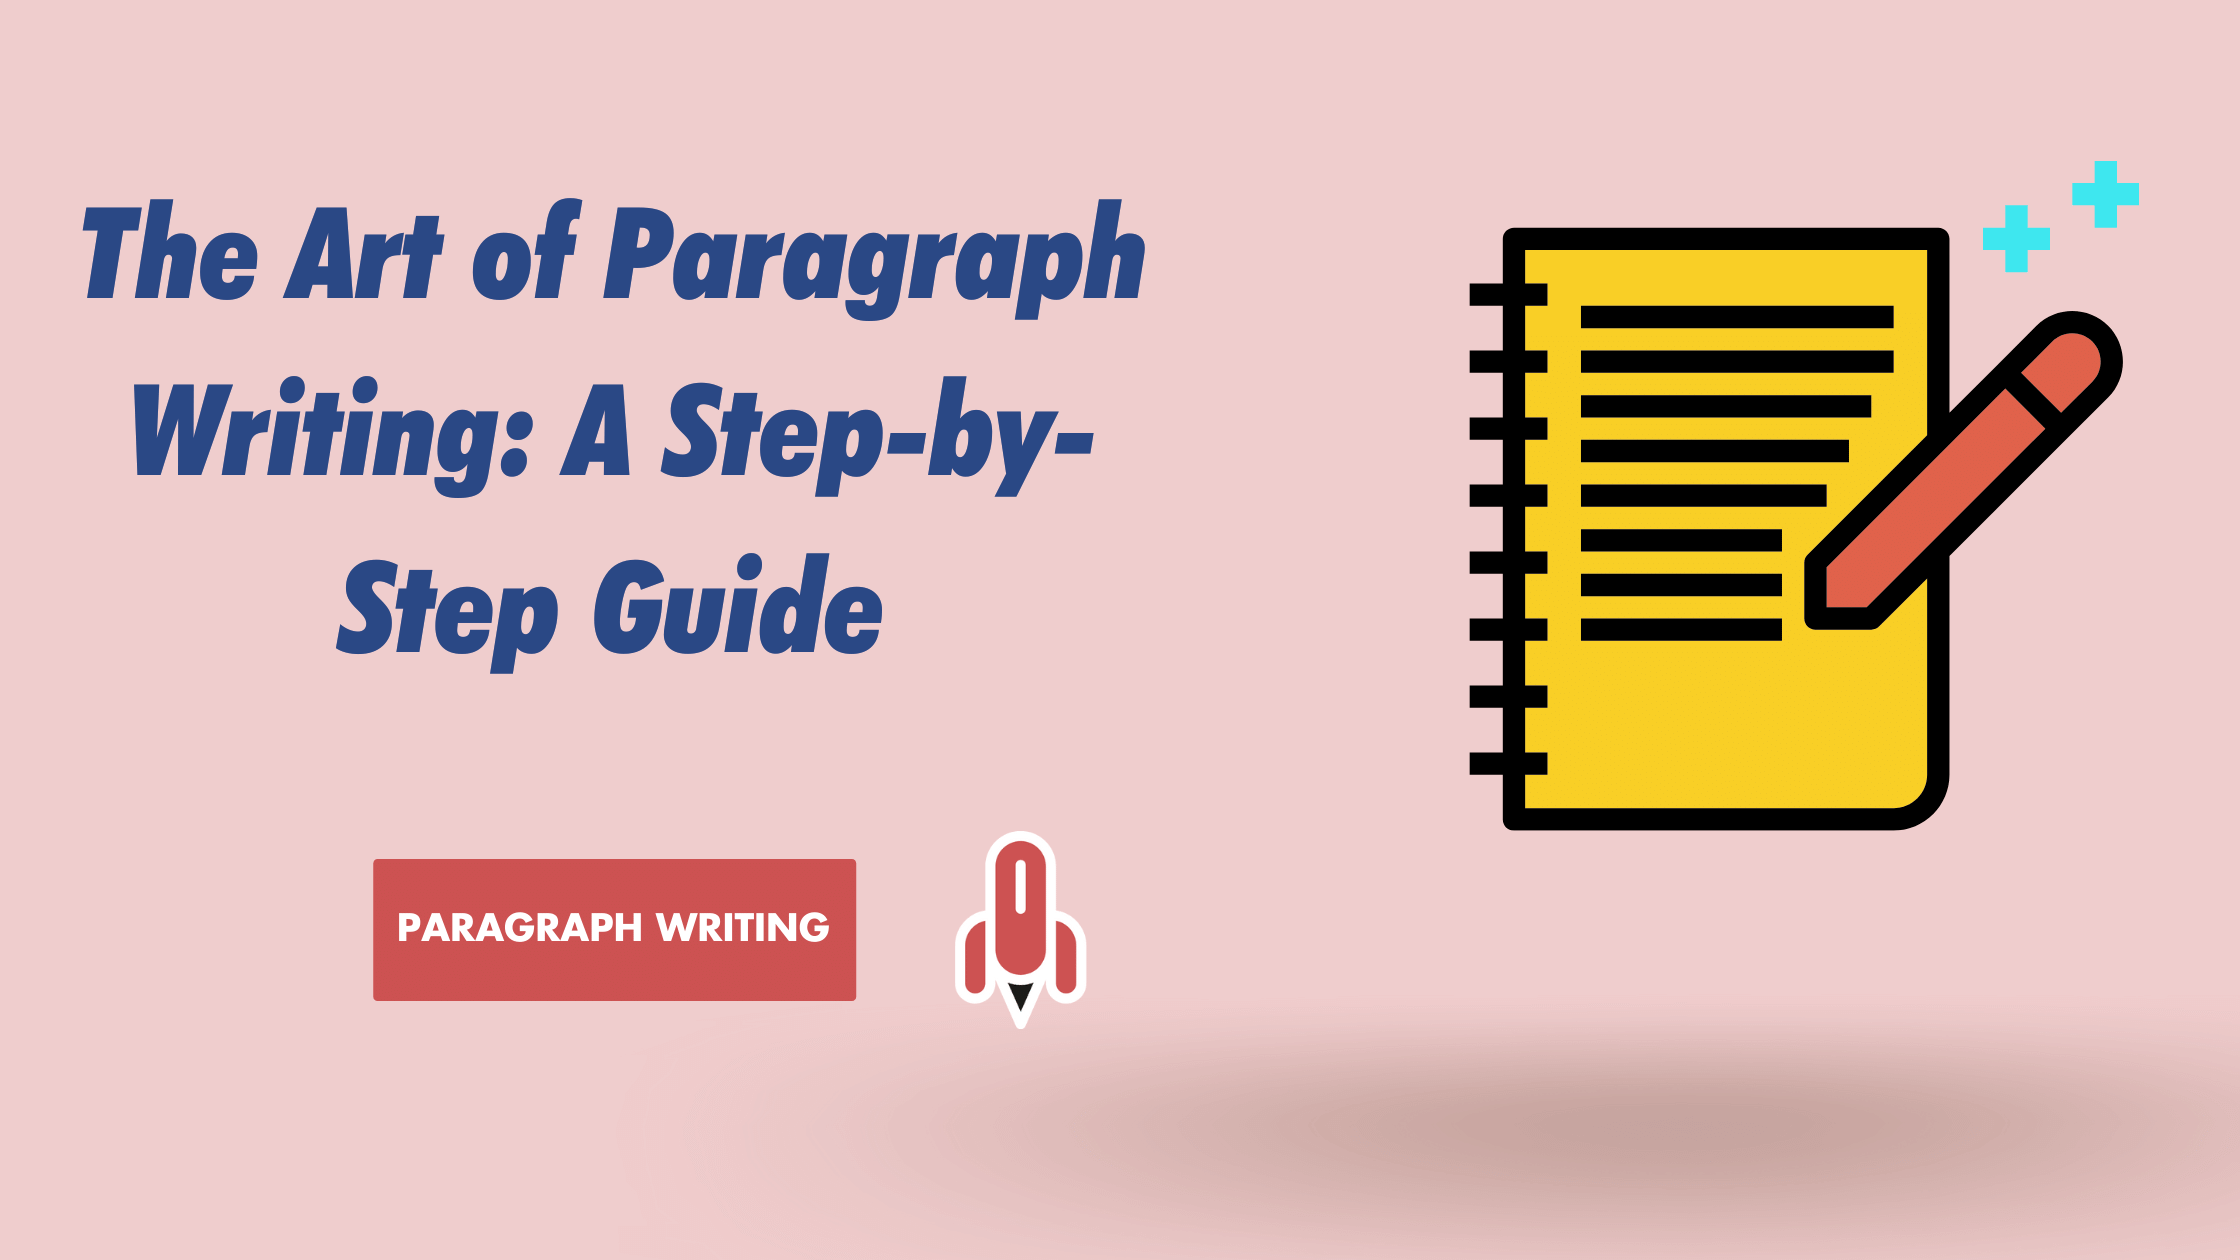 The Art of Paragraph Writing A Step-by-Step Guide